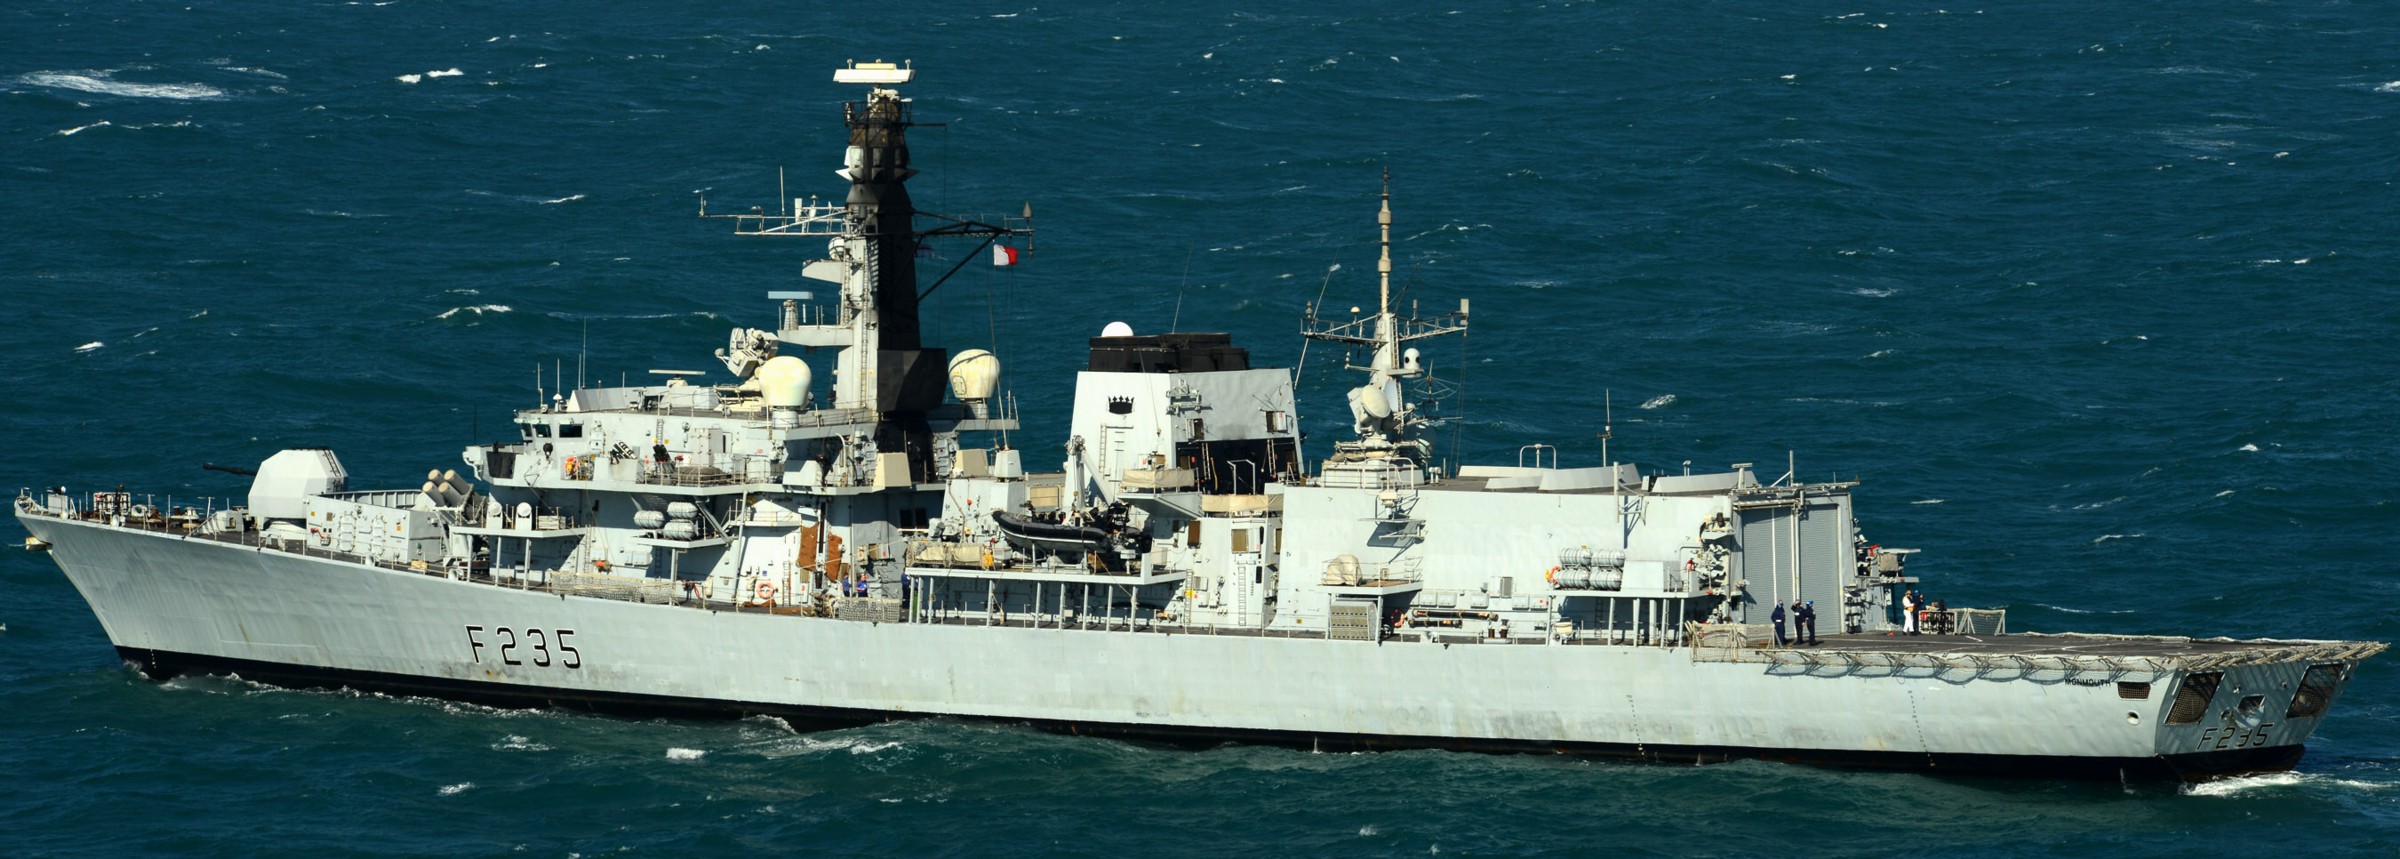 f-235 hms monmouth type 23 duke class guided missile frigate ffg royal navy 08